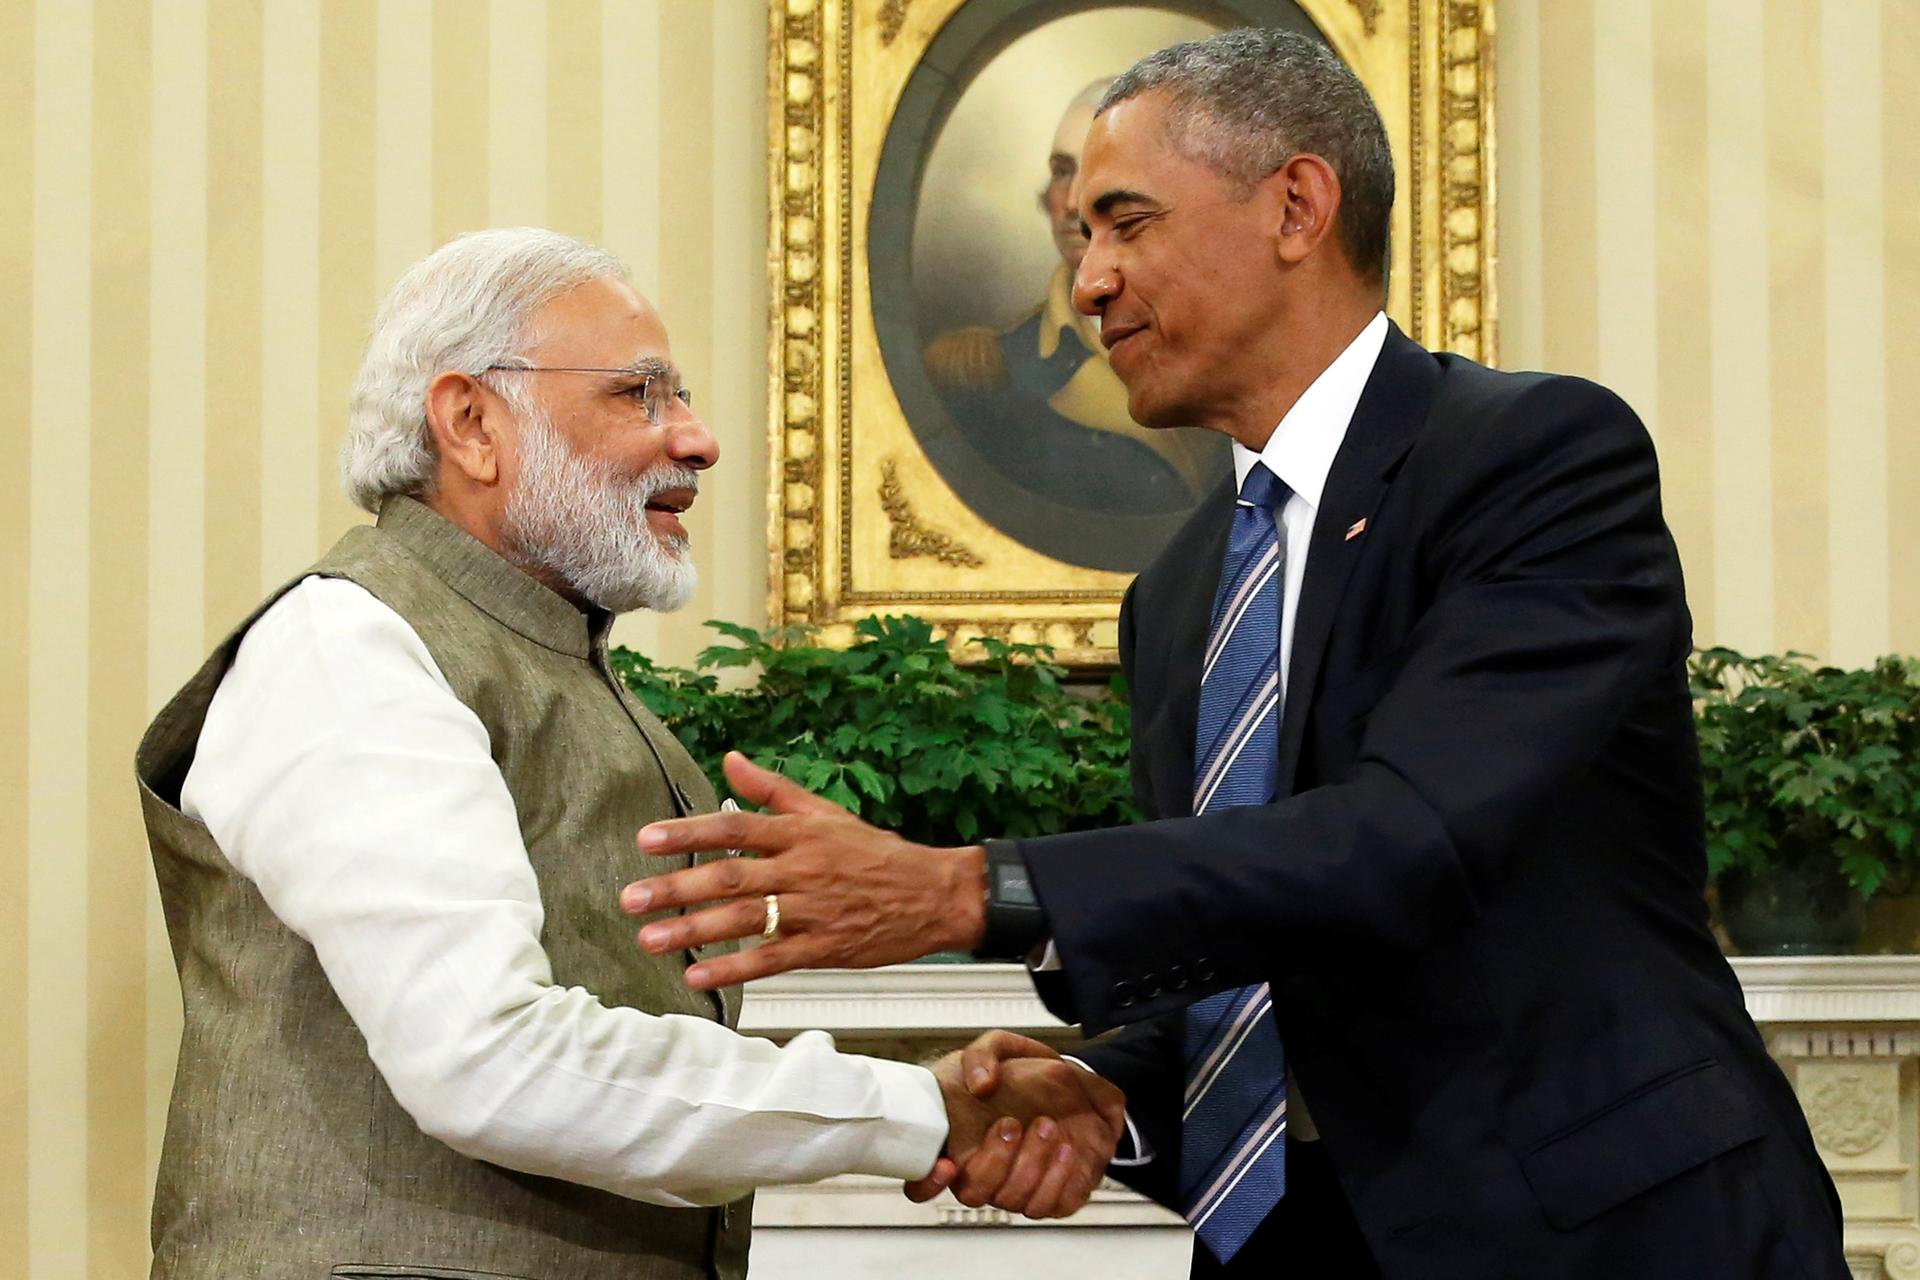 President Obama welcomes Indian PM Modi to the White House